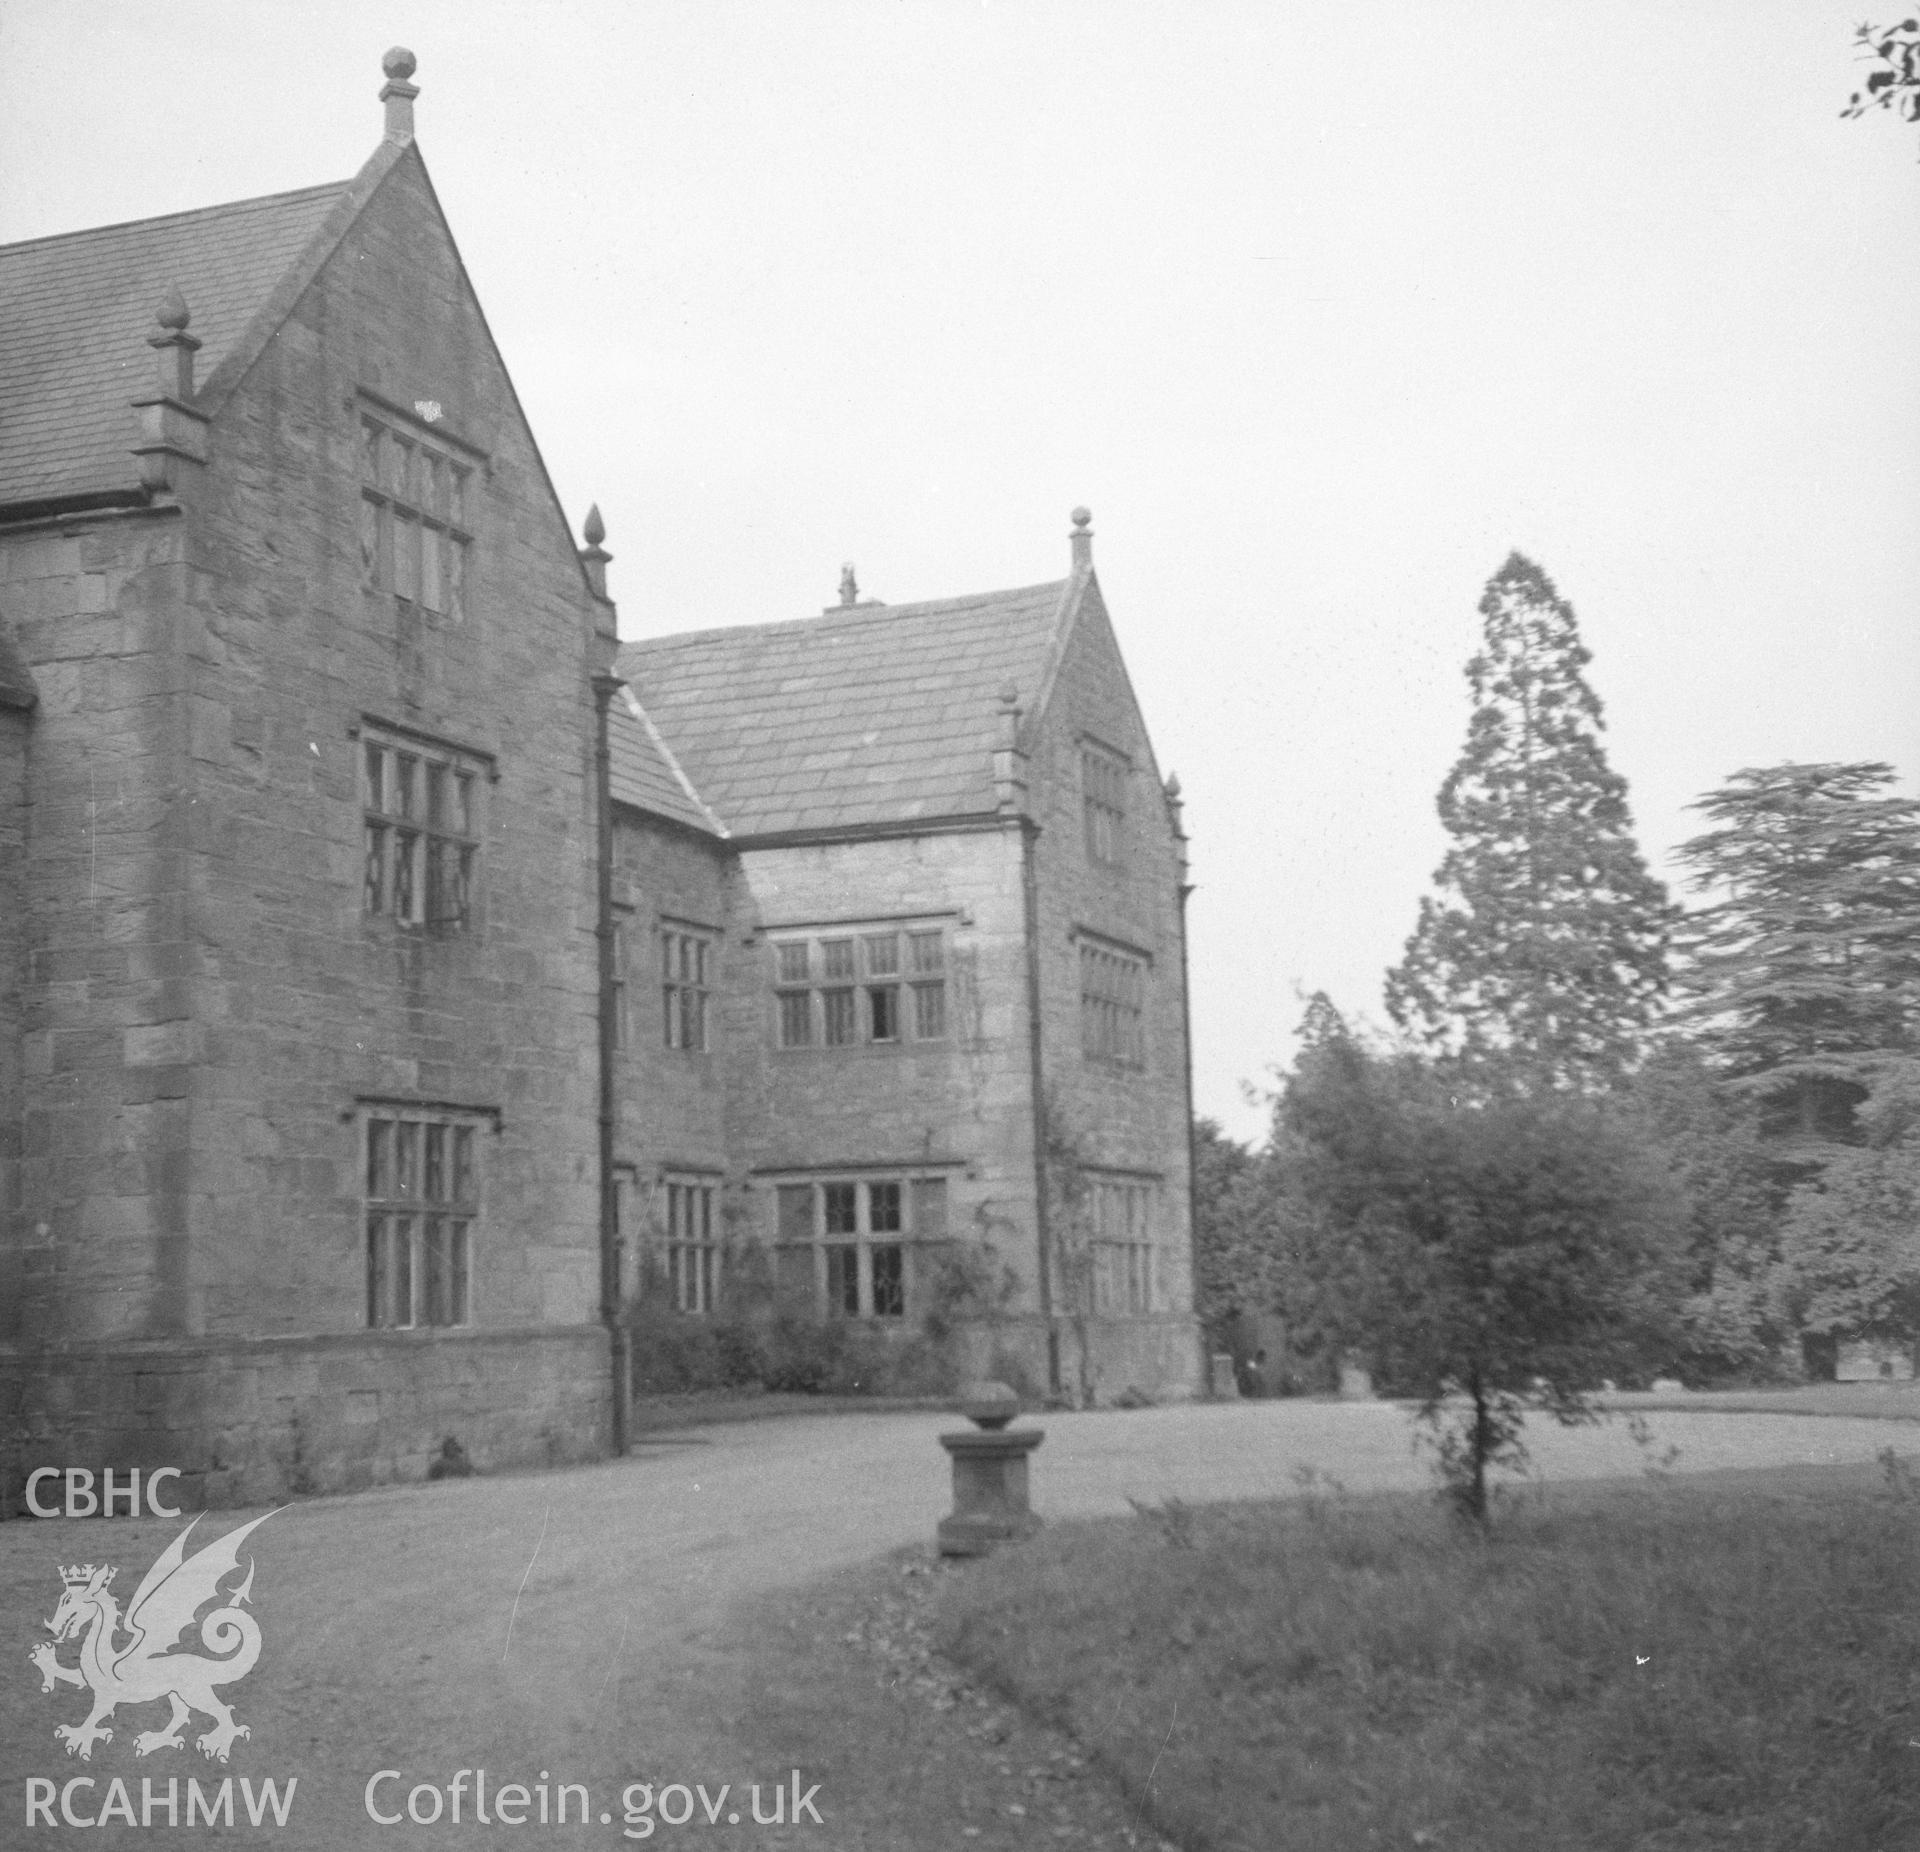 Digital copy of a black and white nitrate negative showing exterior, oblique view of front elevation of Pentrehobyn Hall.